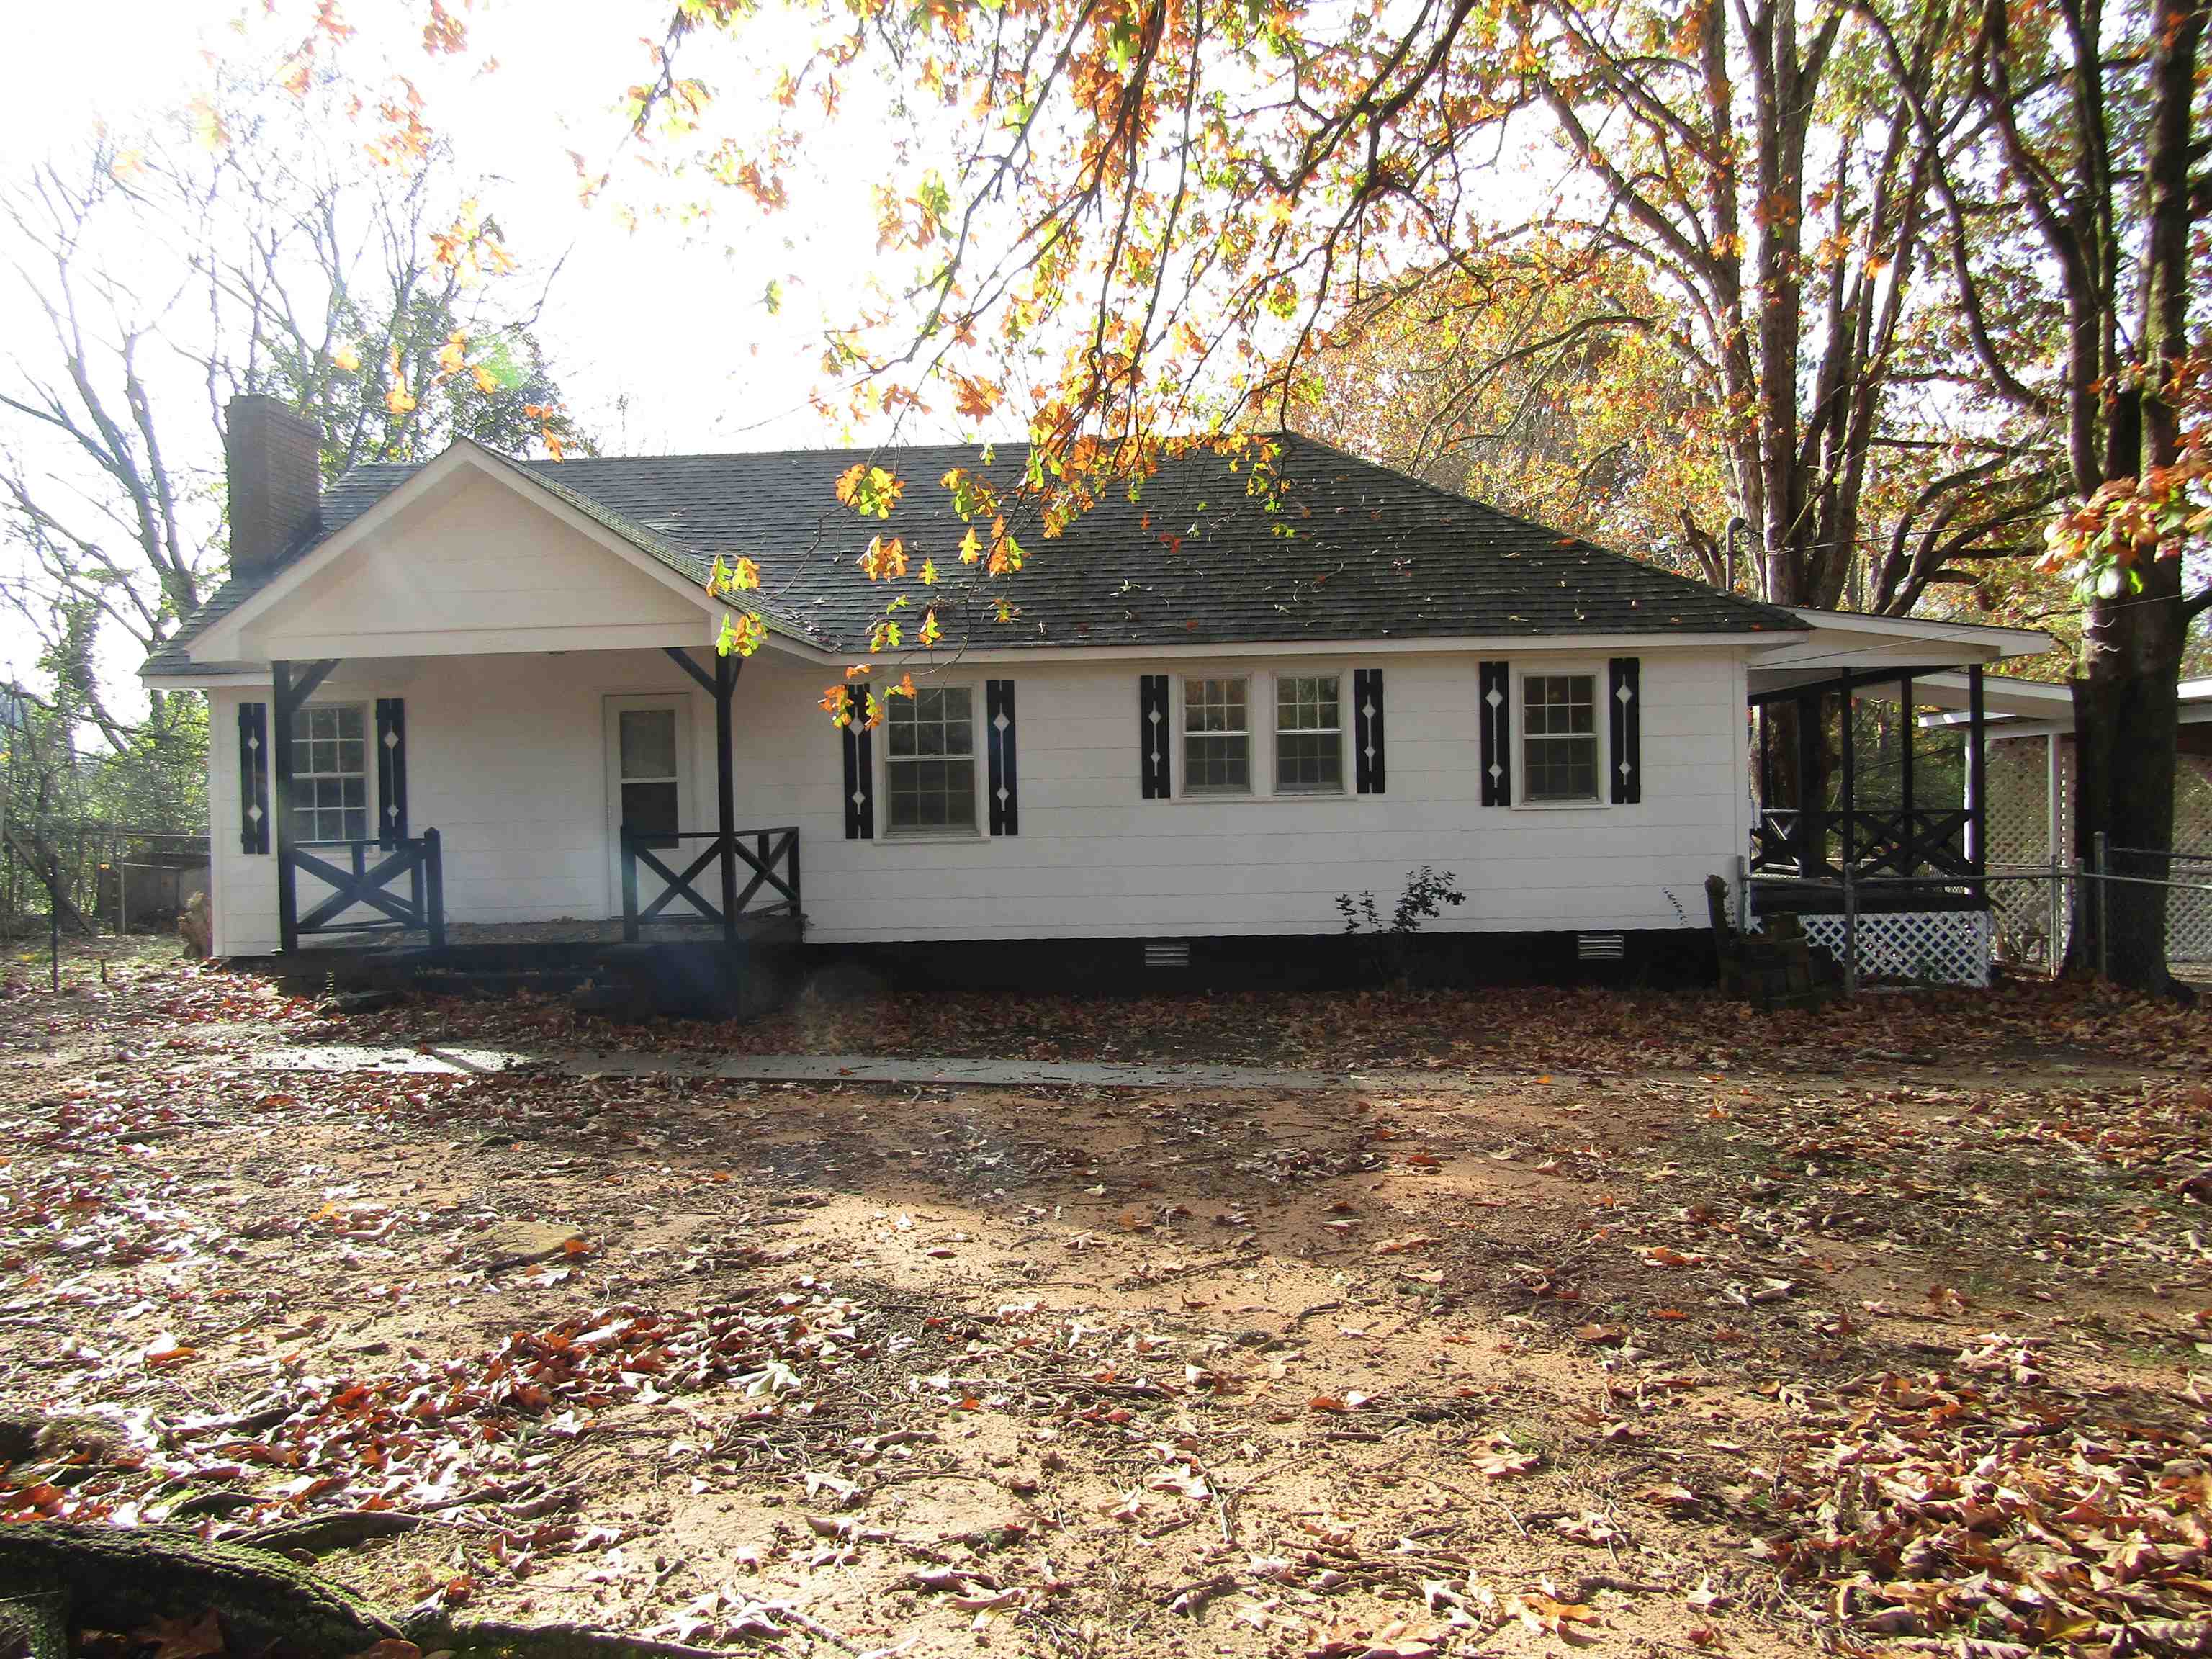 Come check out this updated, move in ready 3 bedroom 1 bath home.  It is conveniently located less than 2 miles from Hwy 43.  You'll love the rural setting with over an acre of land.  Freshly painted outside and inside, new flooring, new windows around back and new doors.  Hablo Espanol.